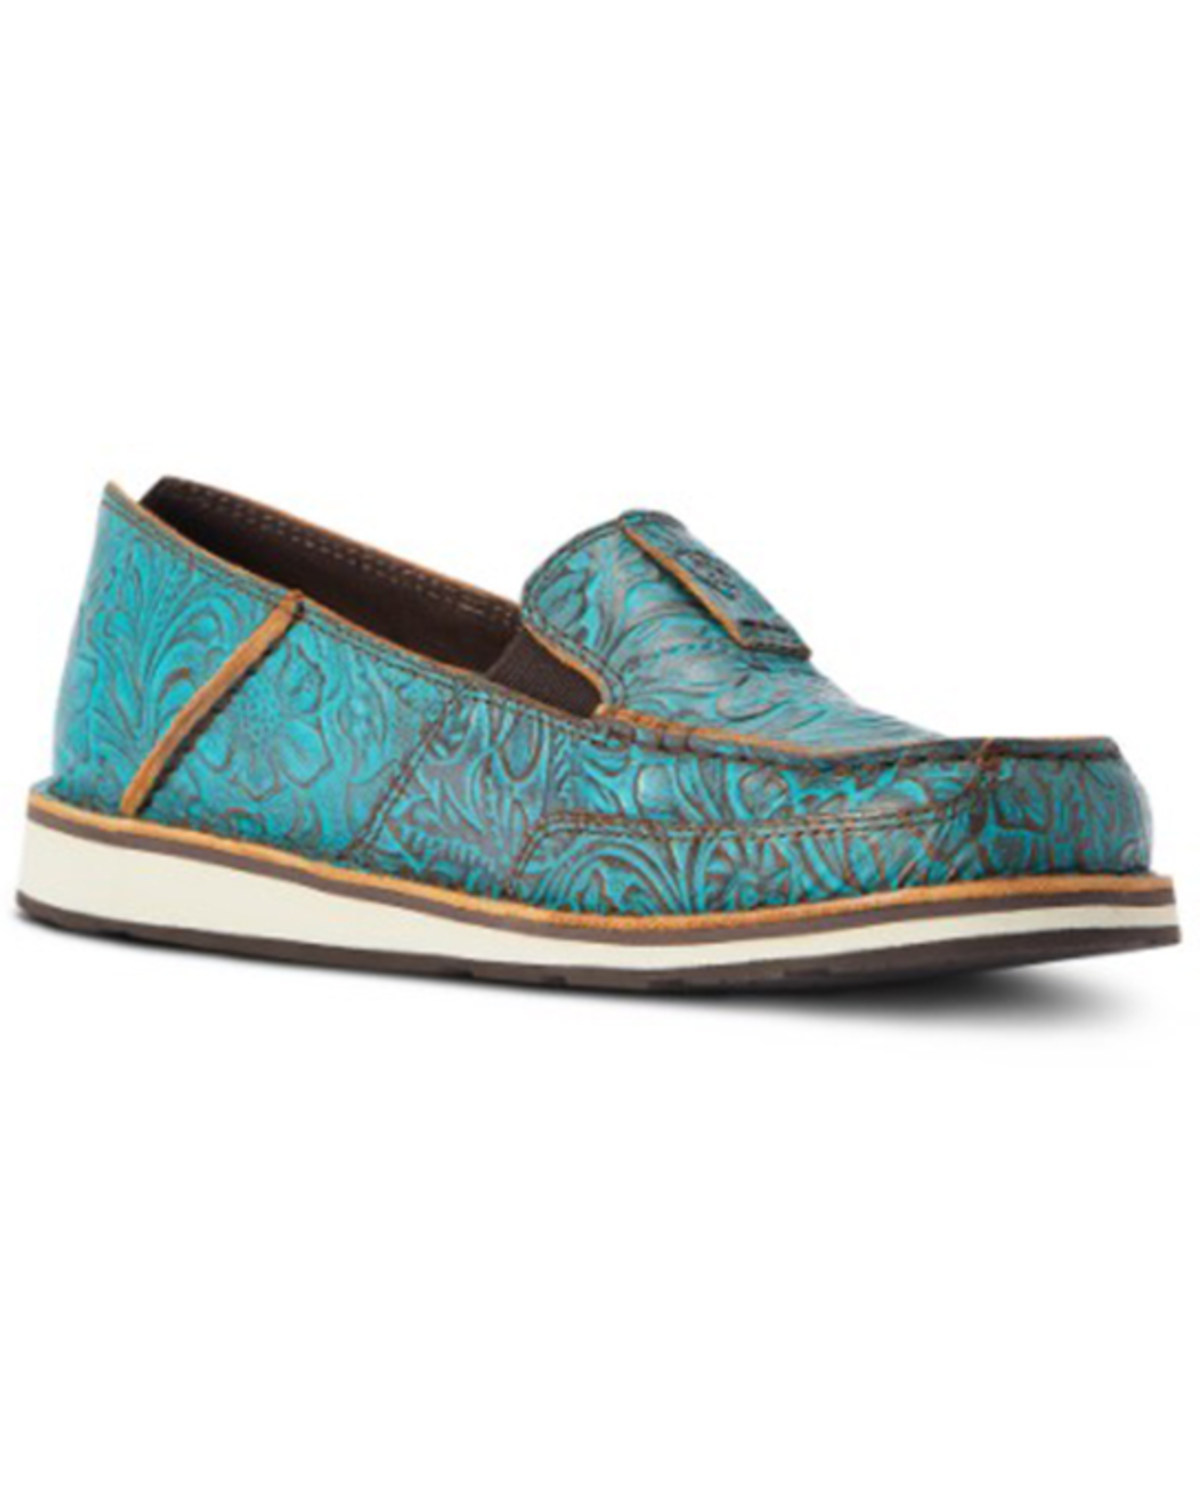 Ariat Women's Brushed Floral Emboss Casual Slip-On Cruiser - Moc Toe